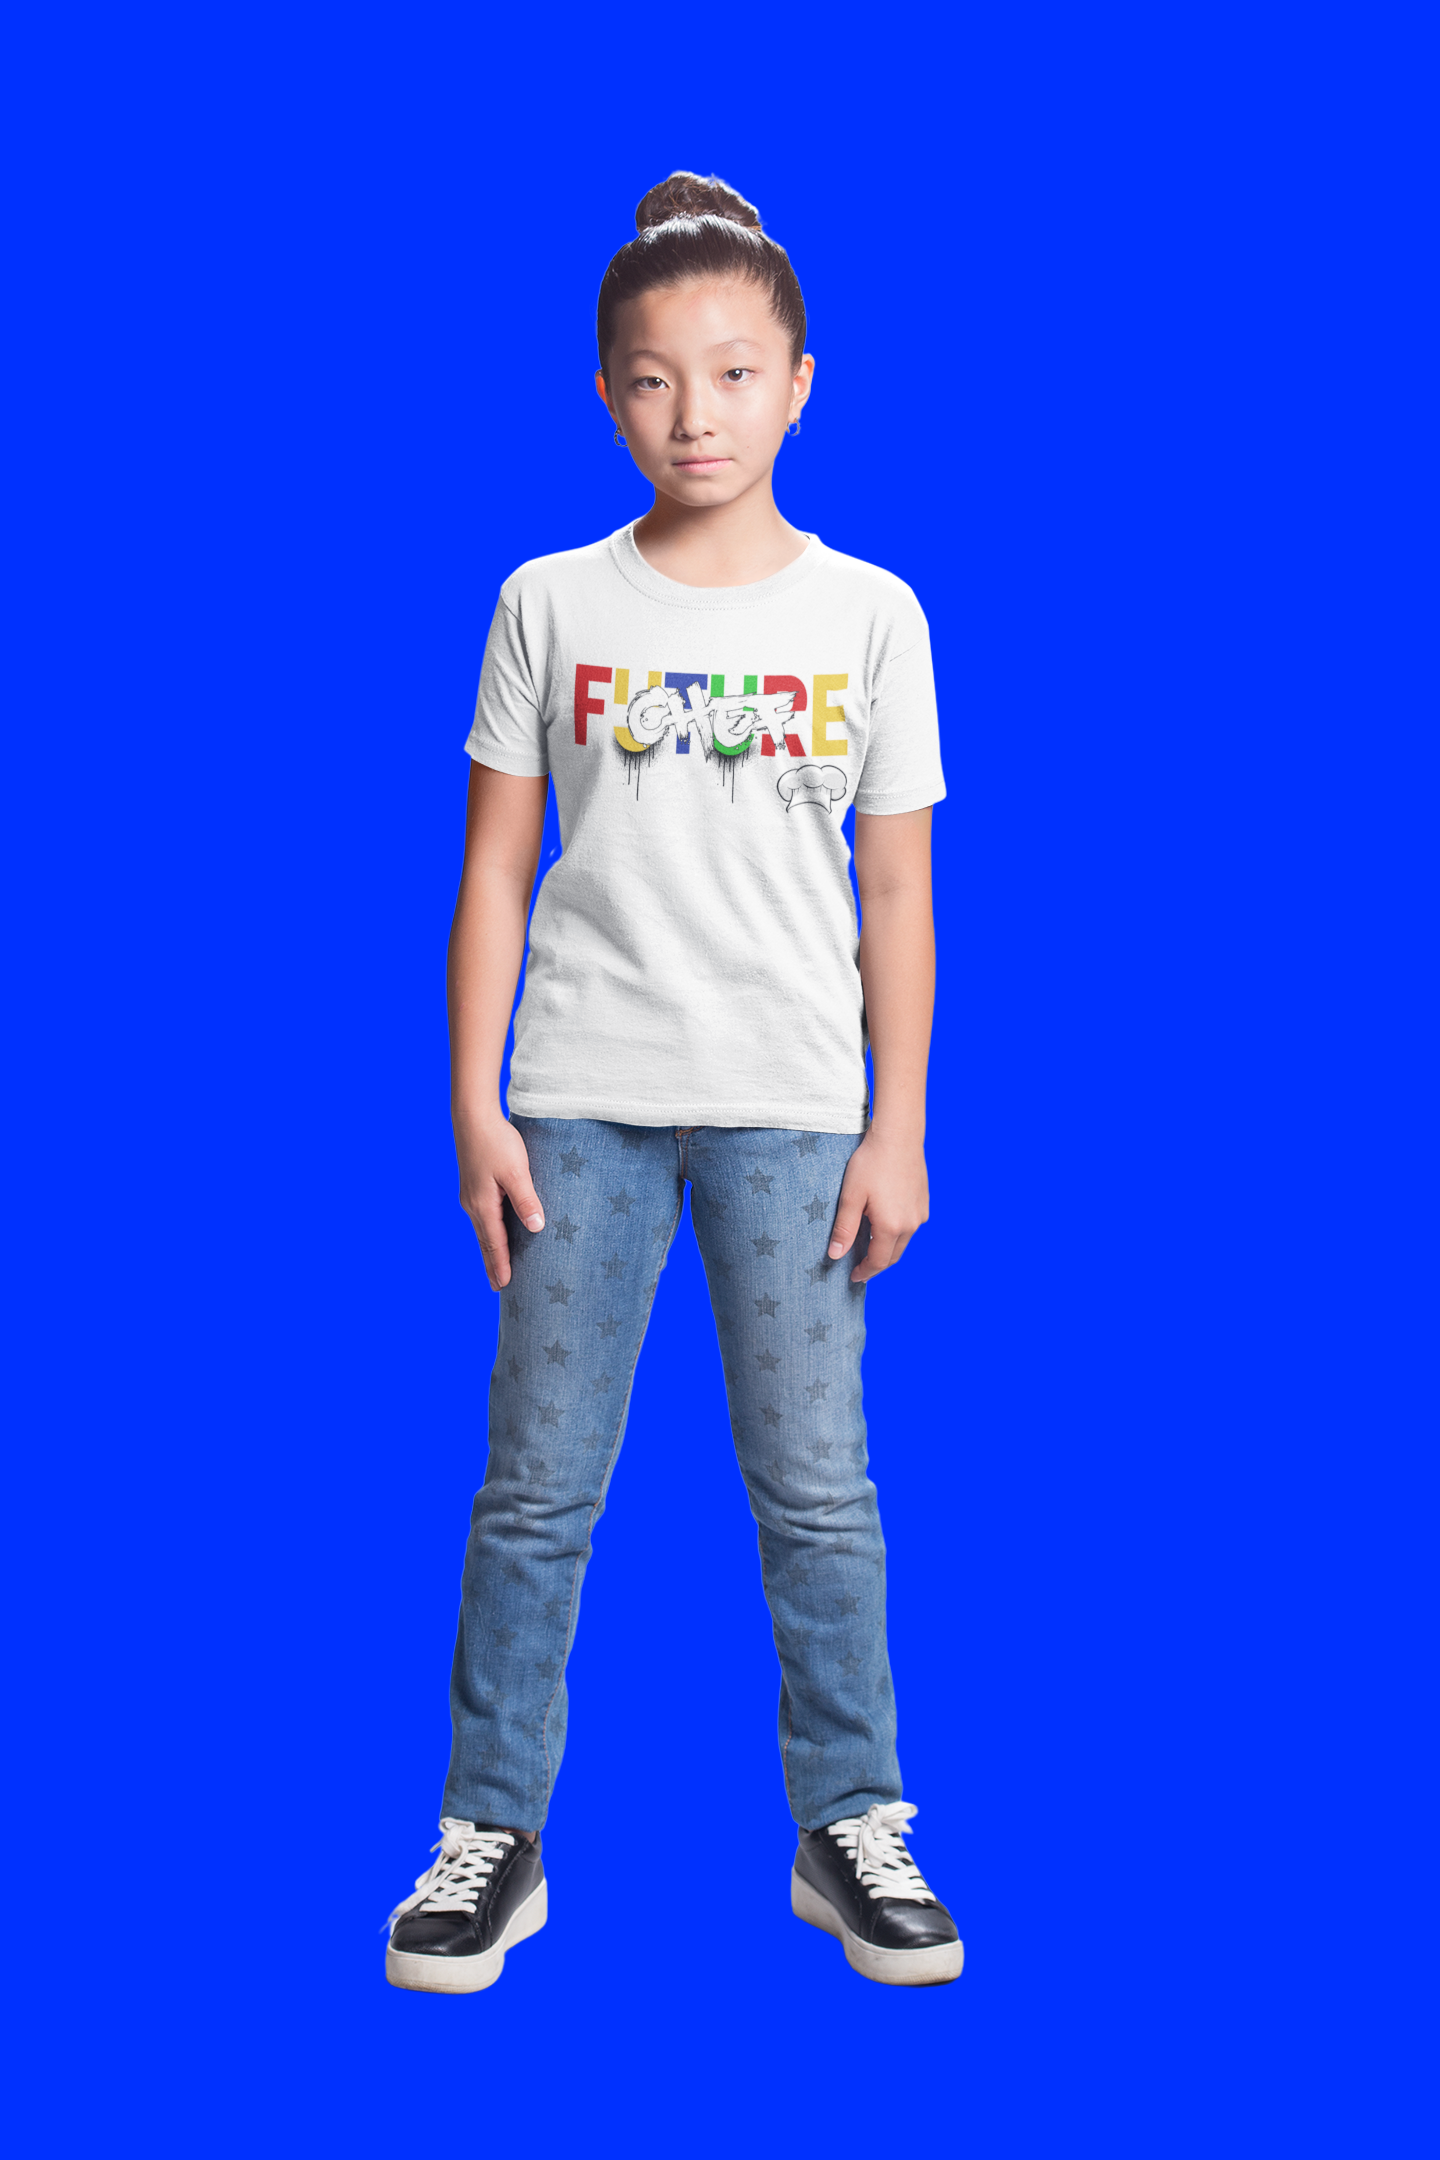 Future Chef Youth T-Shirt